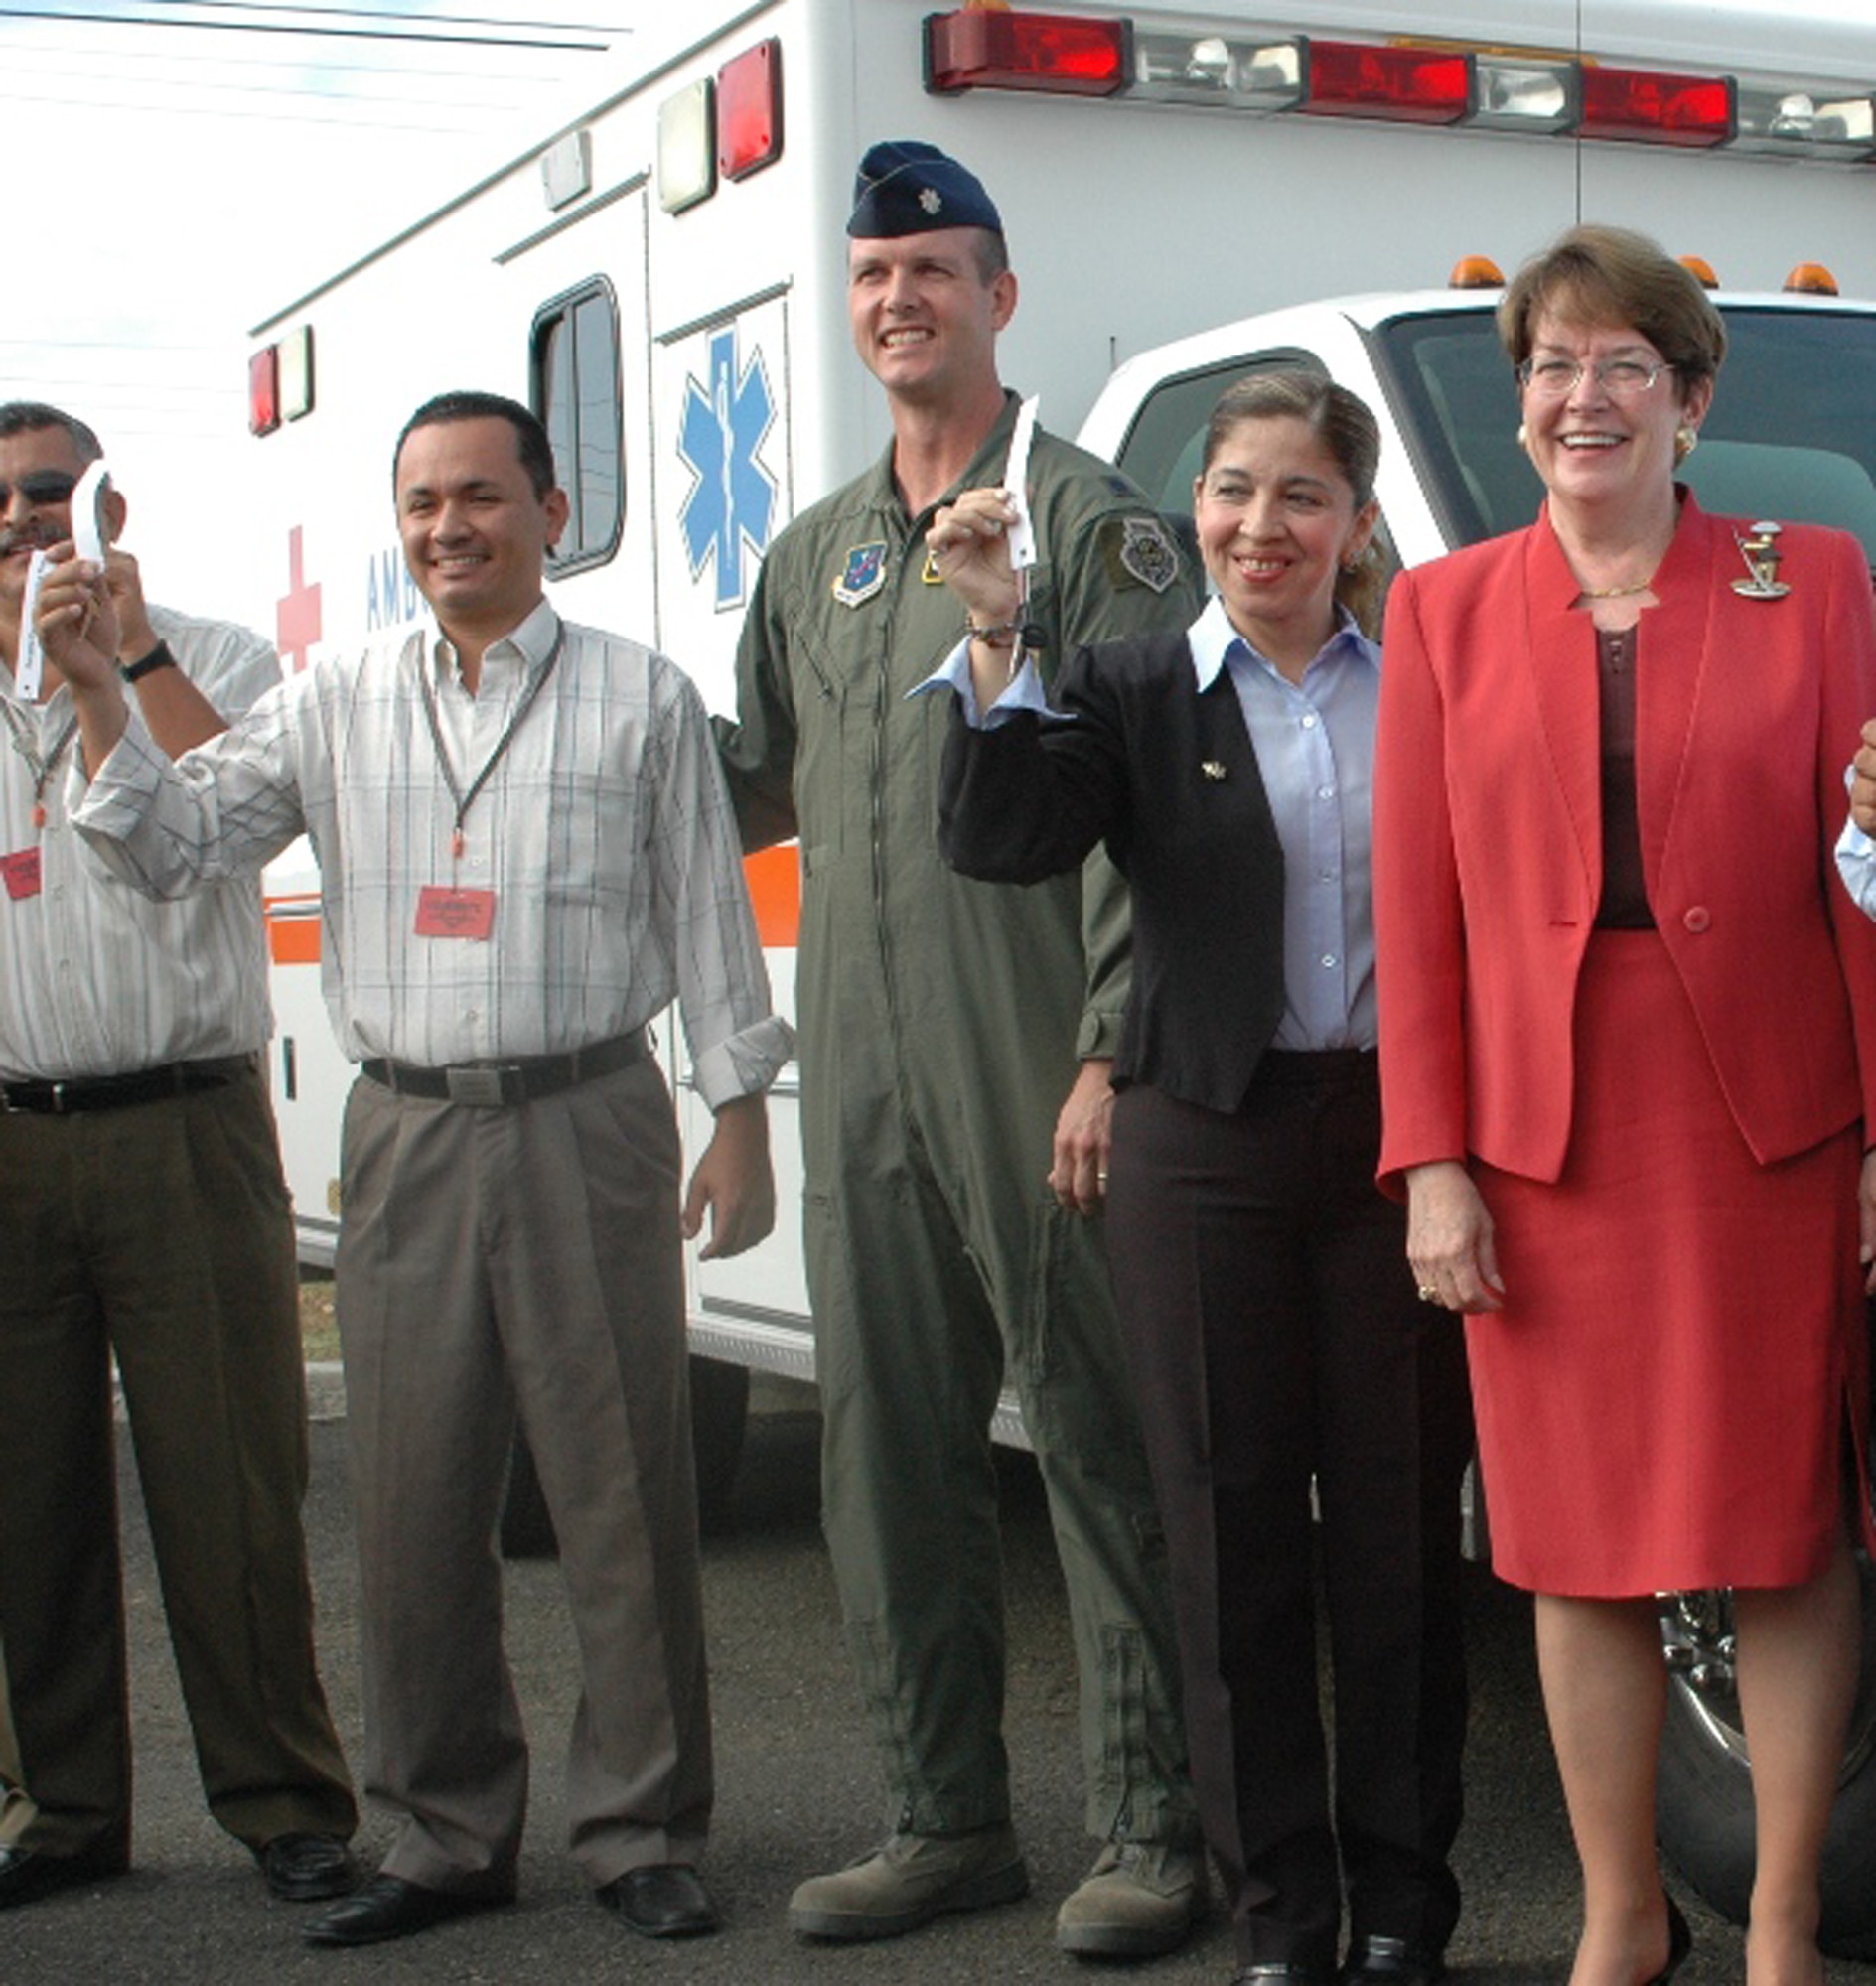 FORWARD OPERATING LOCATION MANTA, Ecuador -- Lt. Col. Jared Curtis, 478th Expeditionary Operations Squadron commander, stands with local citizens in front of an ambulance donated to an organization near FOL Manta Sept. 16. To mark the end of 10 years of community relations activities, officials donated almost $1 million worth of equipment, food and supplies to local establishments. FOL Manta was deactivated Sept. 18 after a lease between the United States and Ecuador expired. (Courtesy Photo)